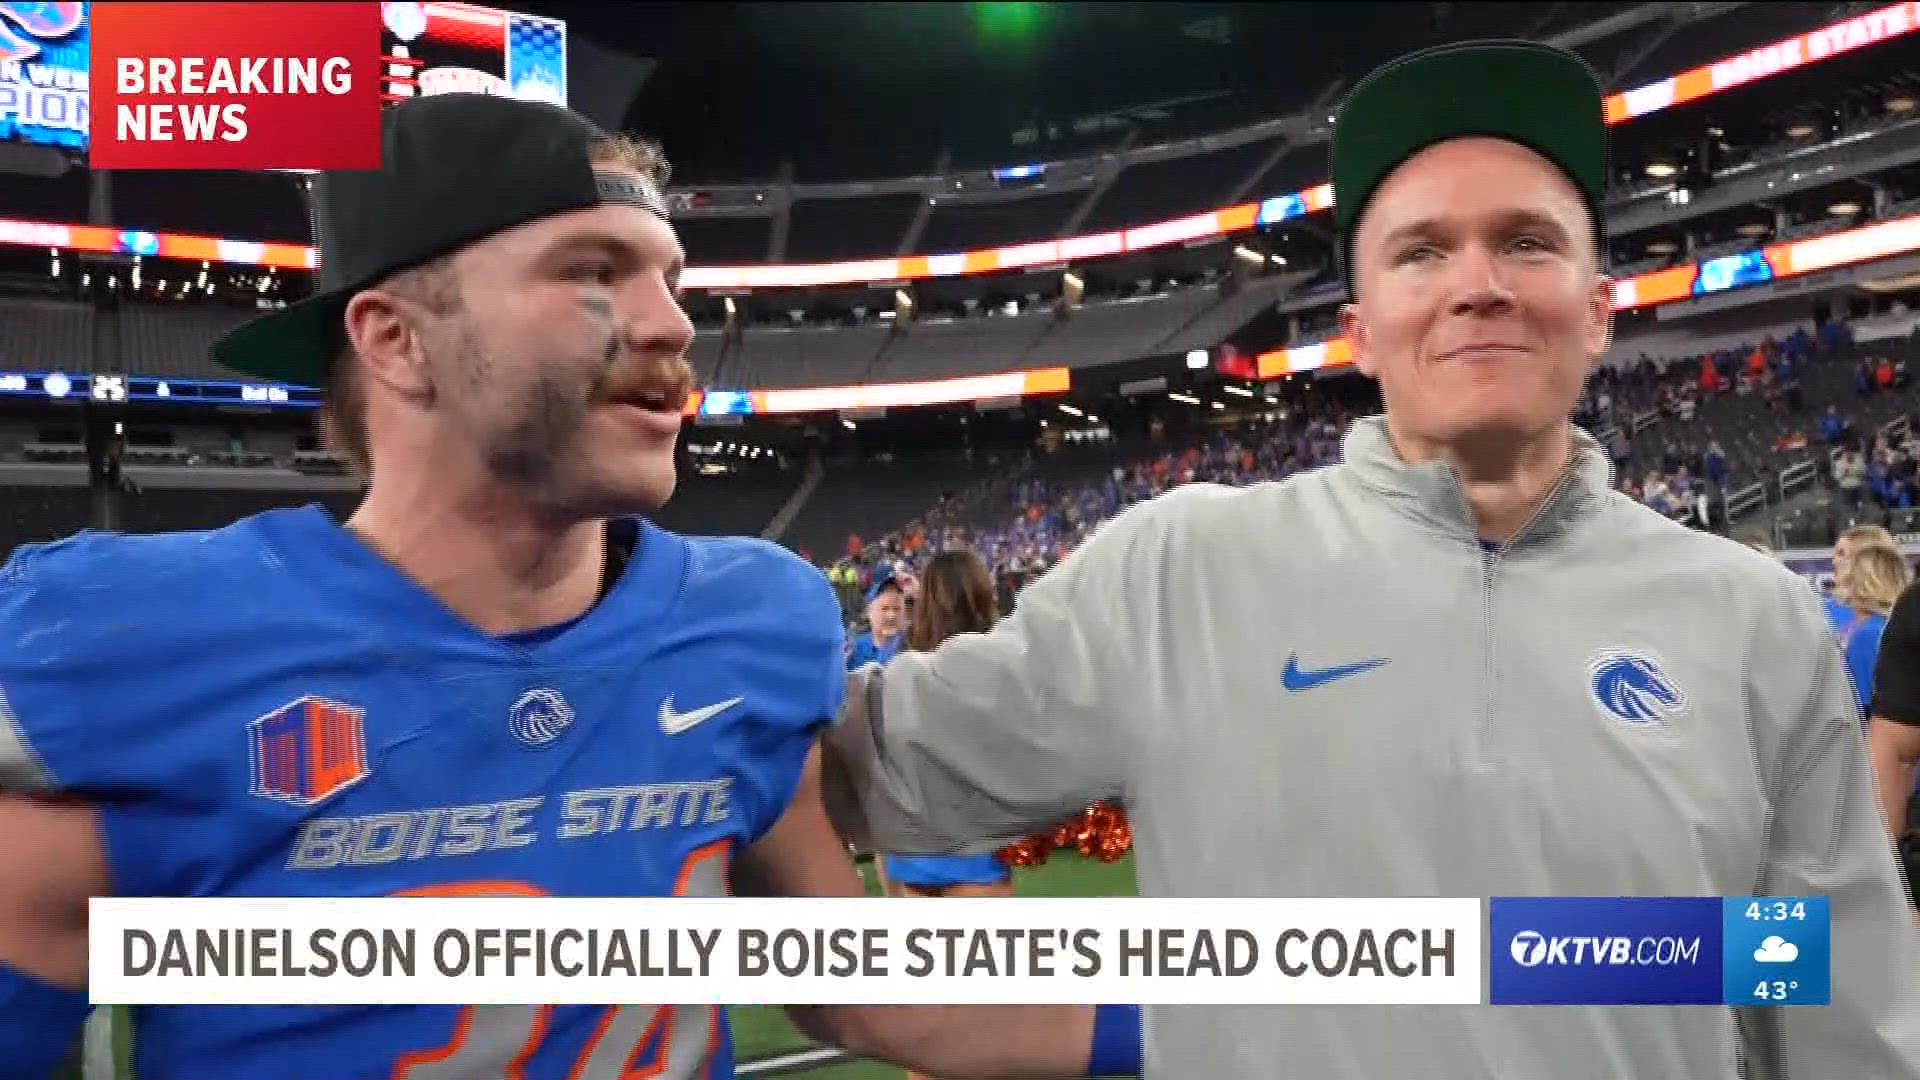 Danielson got his "dream job" – being named the new head coach of Boise State on Sunday after making history as an interim and spending seven years with the Broncos.